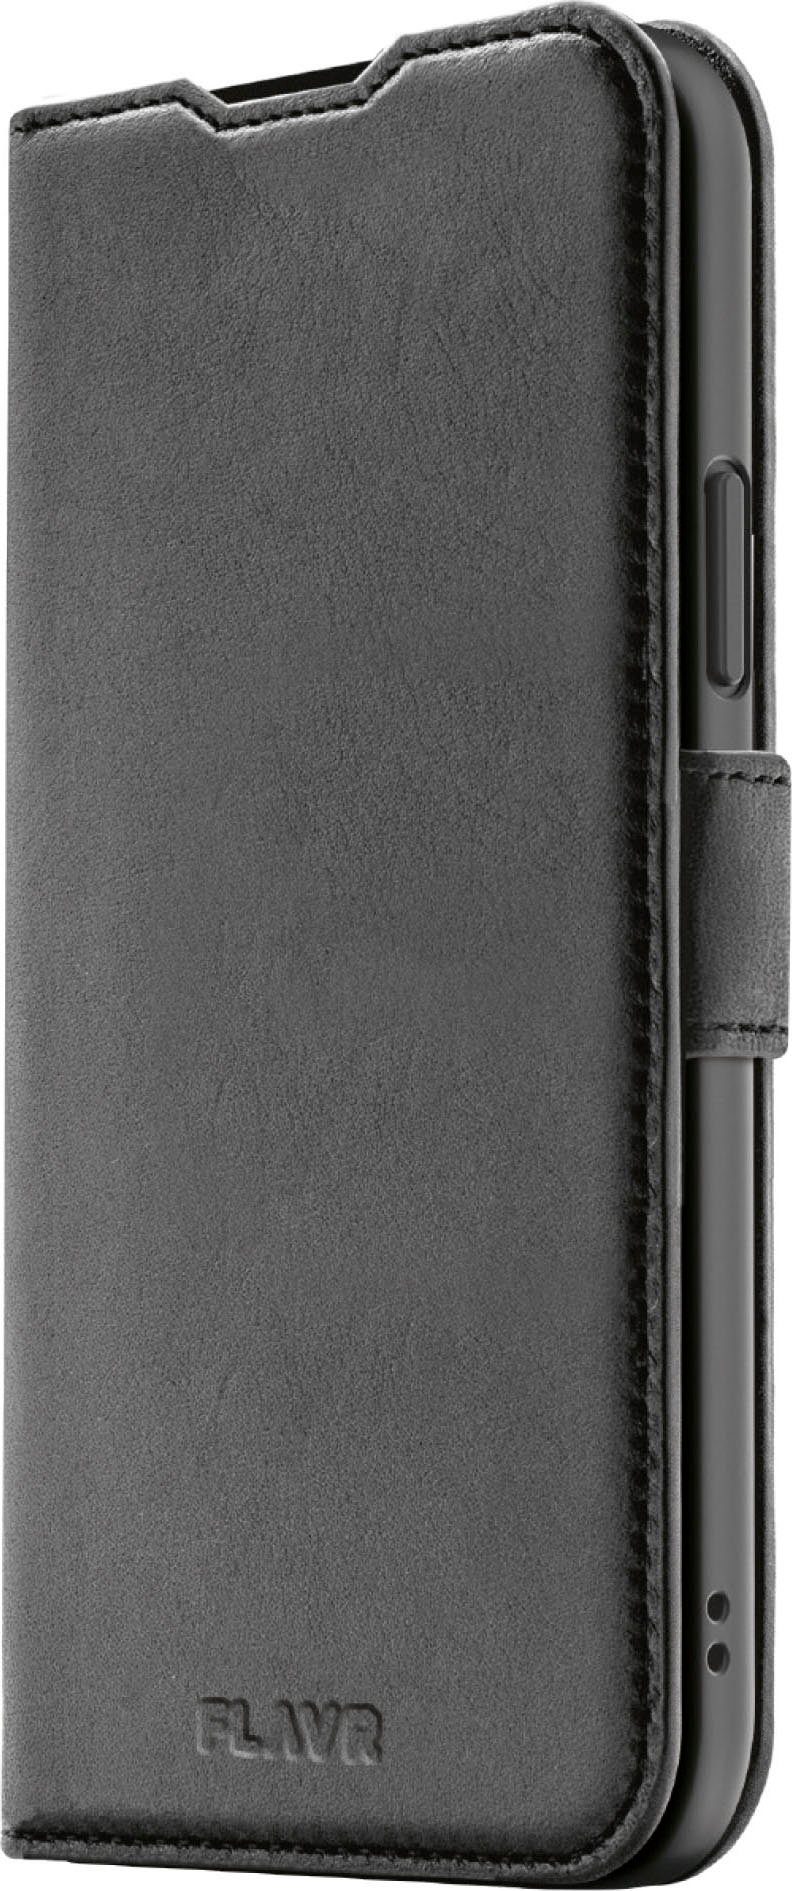 adidas Wallet Leather Originals FLAVR Case Backcover Recycled